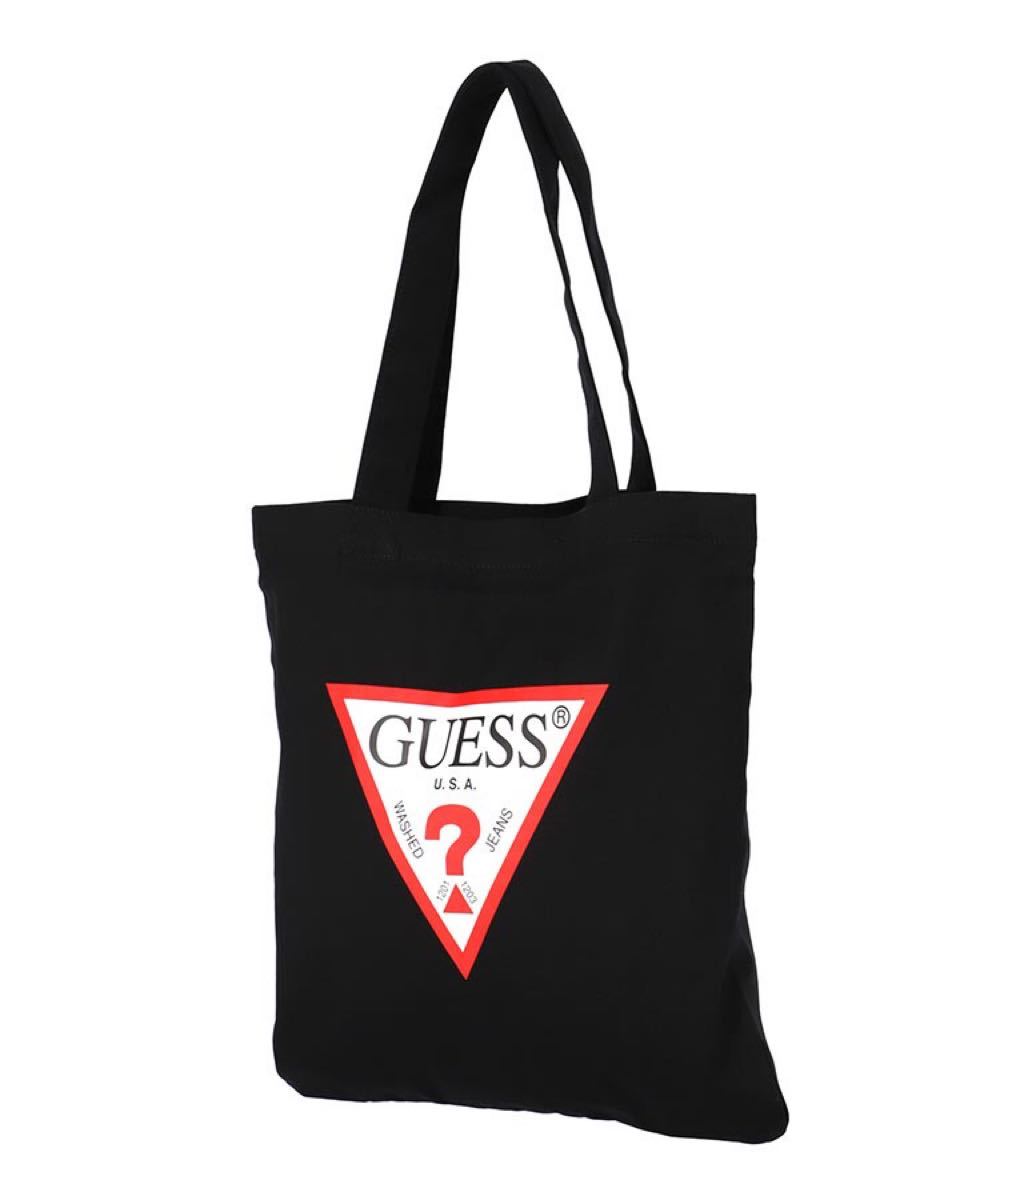 GUESS トートバッグの新品・未使用品・中古品｜PayPayフリマ